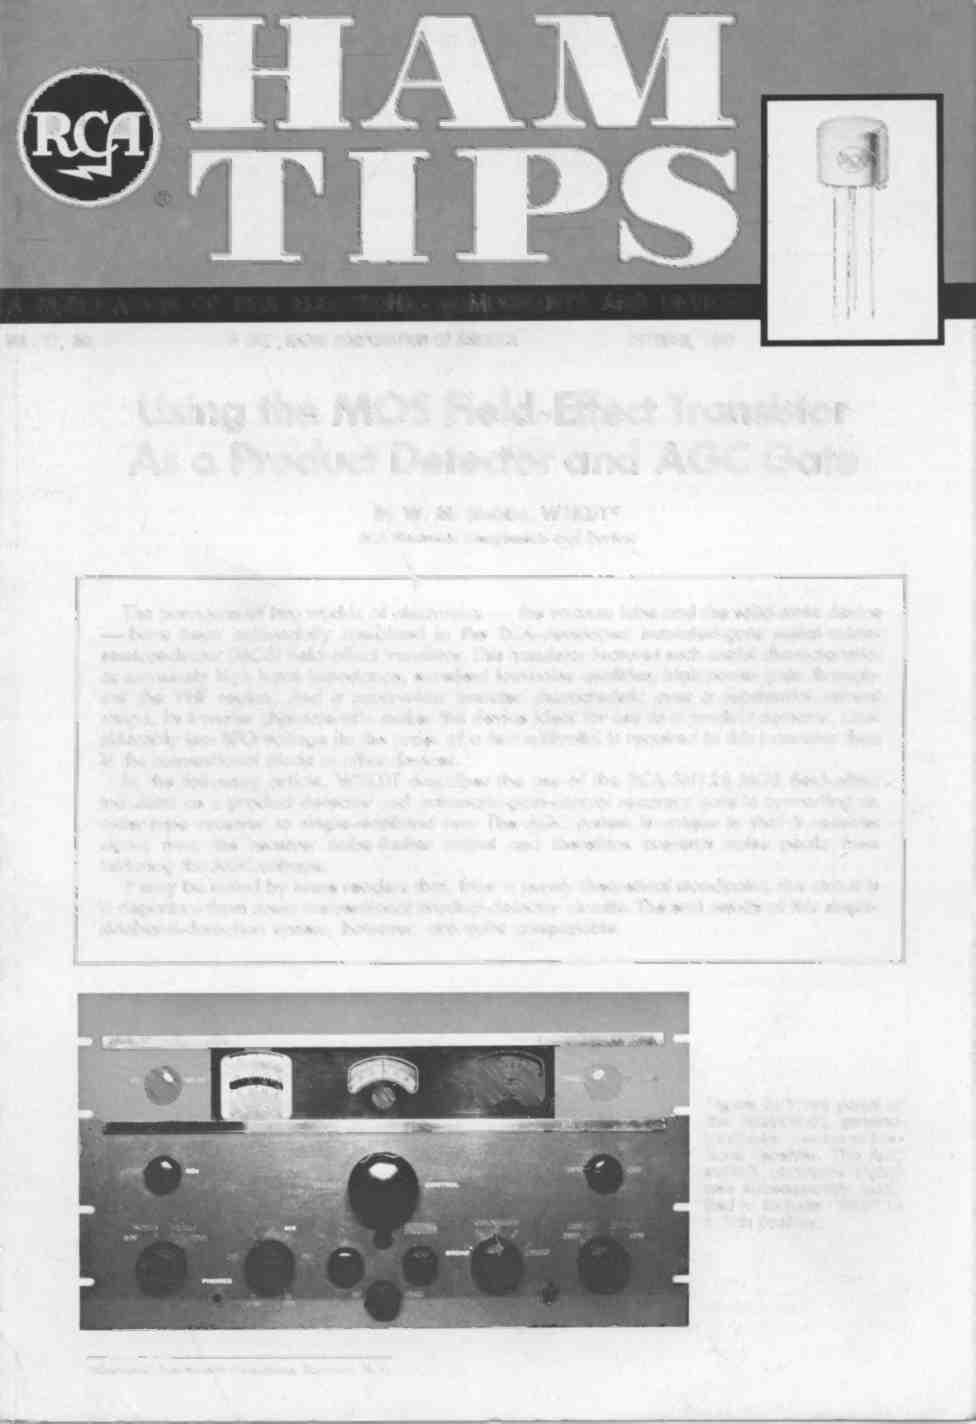 A PUBLICATION OF RCA ELECTRONIC COMPONENTS AND DEVICES VOL. 27, NO. 3 1967, RADIO CORPORATION OF AMERICA OCTOBER, 1967 Using the MOS Field -Effect Transistor As a Product Detector and AGC Gate By W.